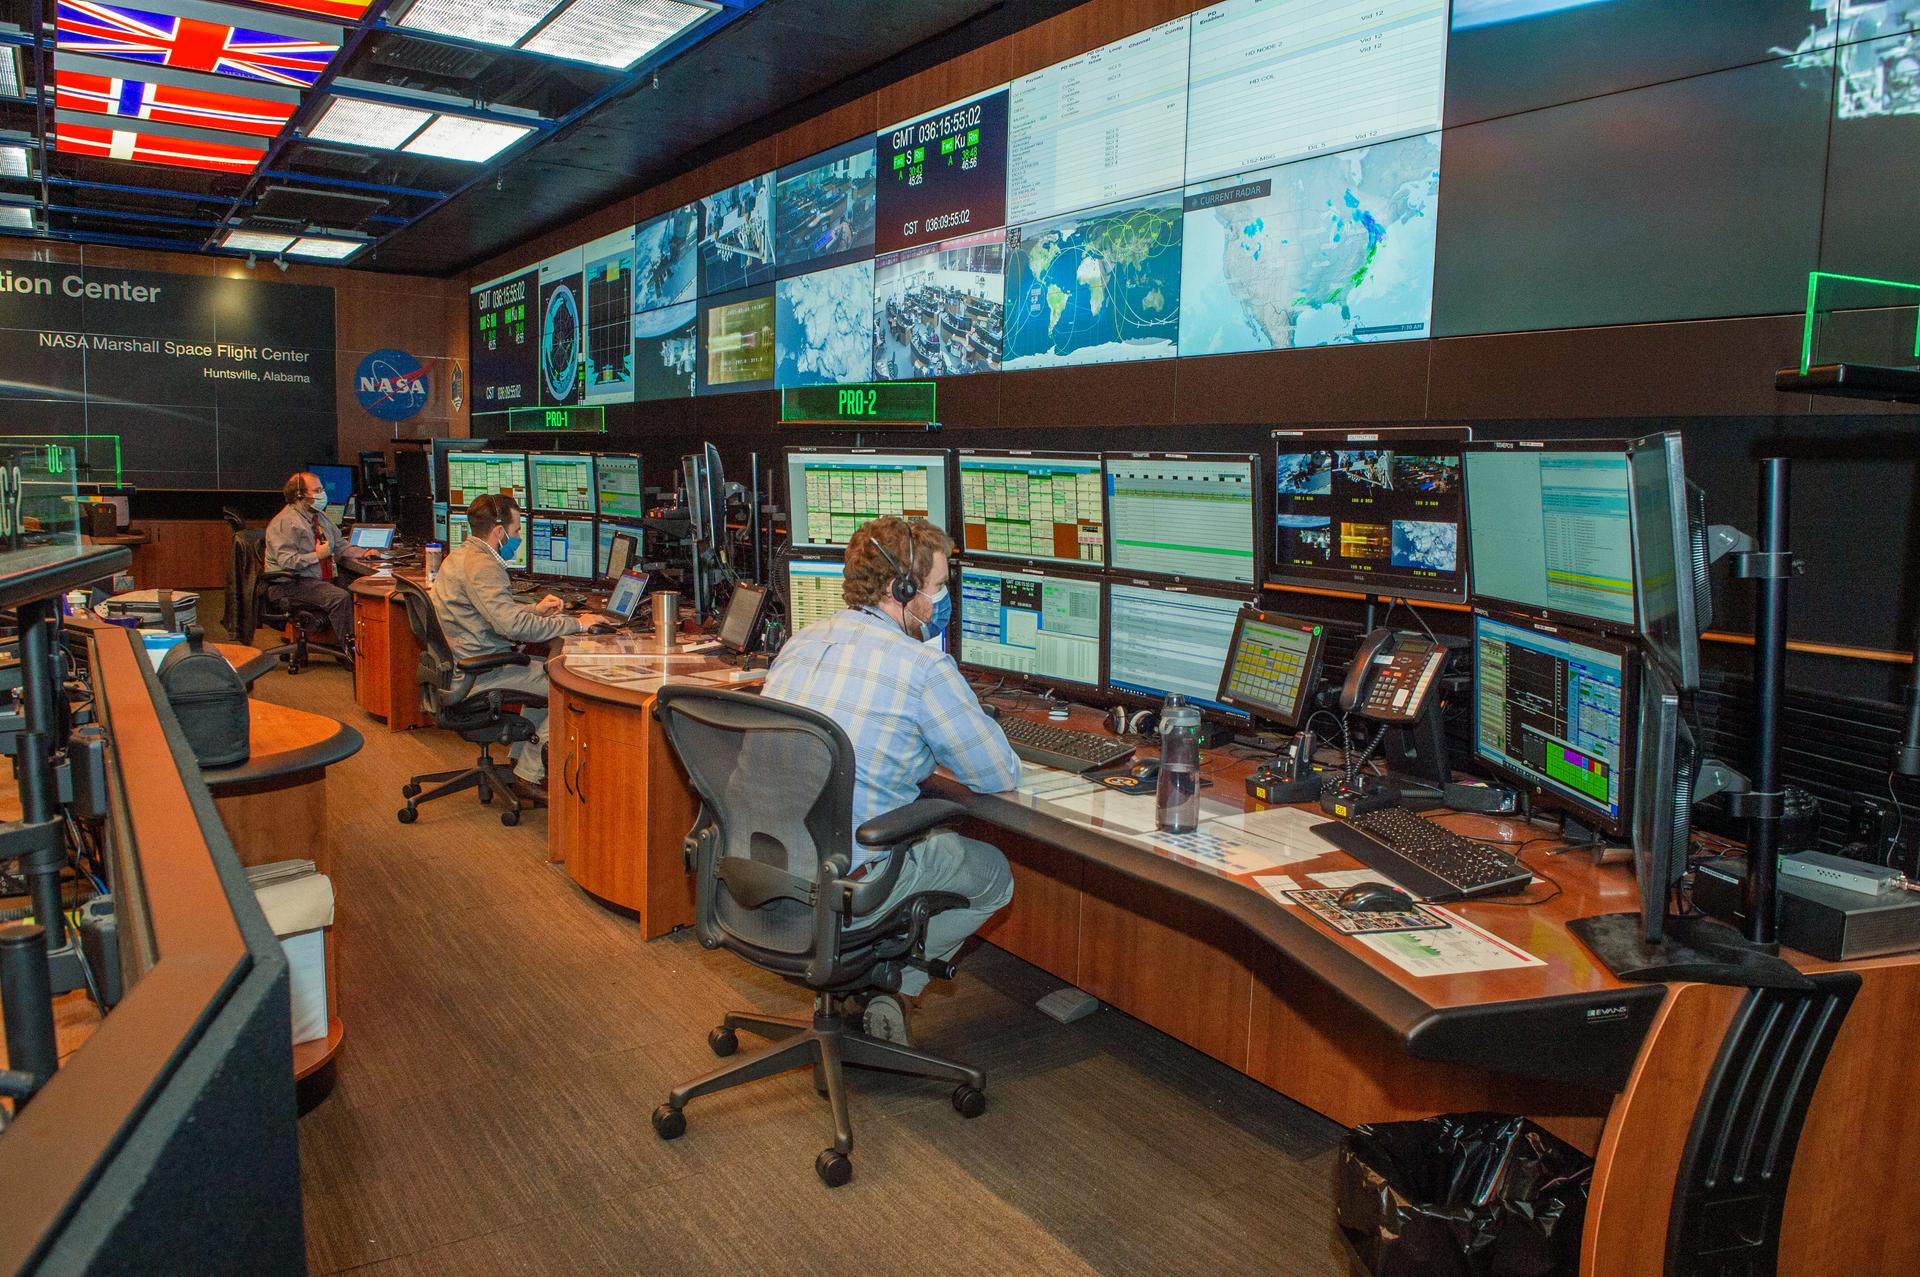 The Payload Operations Integration Center, or POIC, at NASA’s Marshall Space Flight Center.